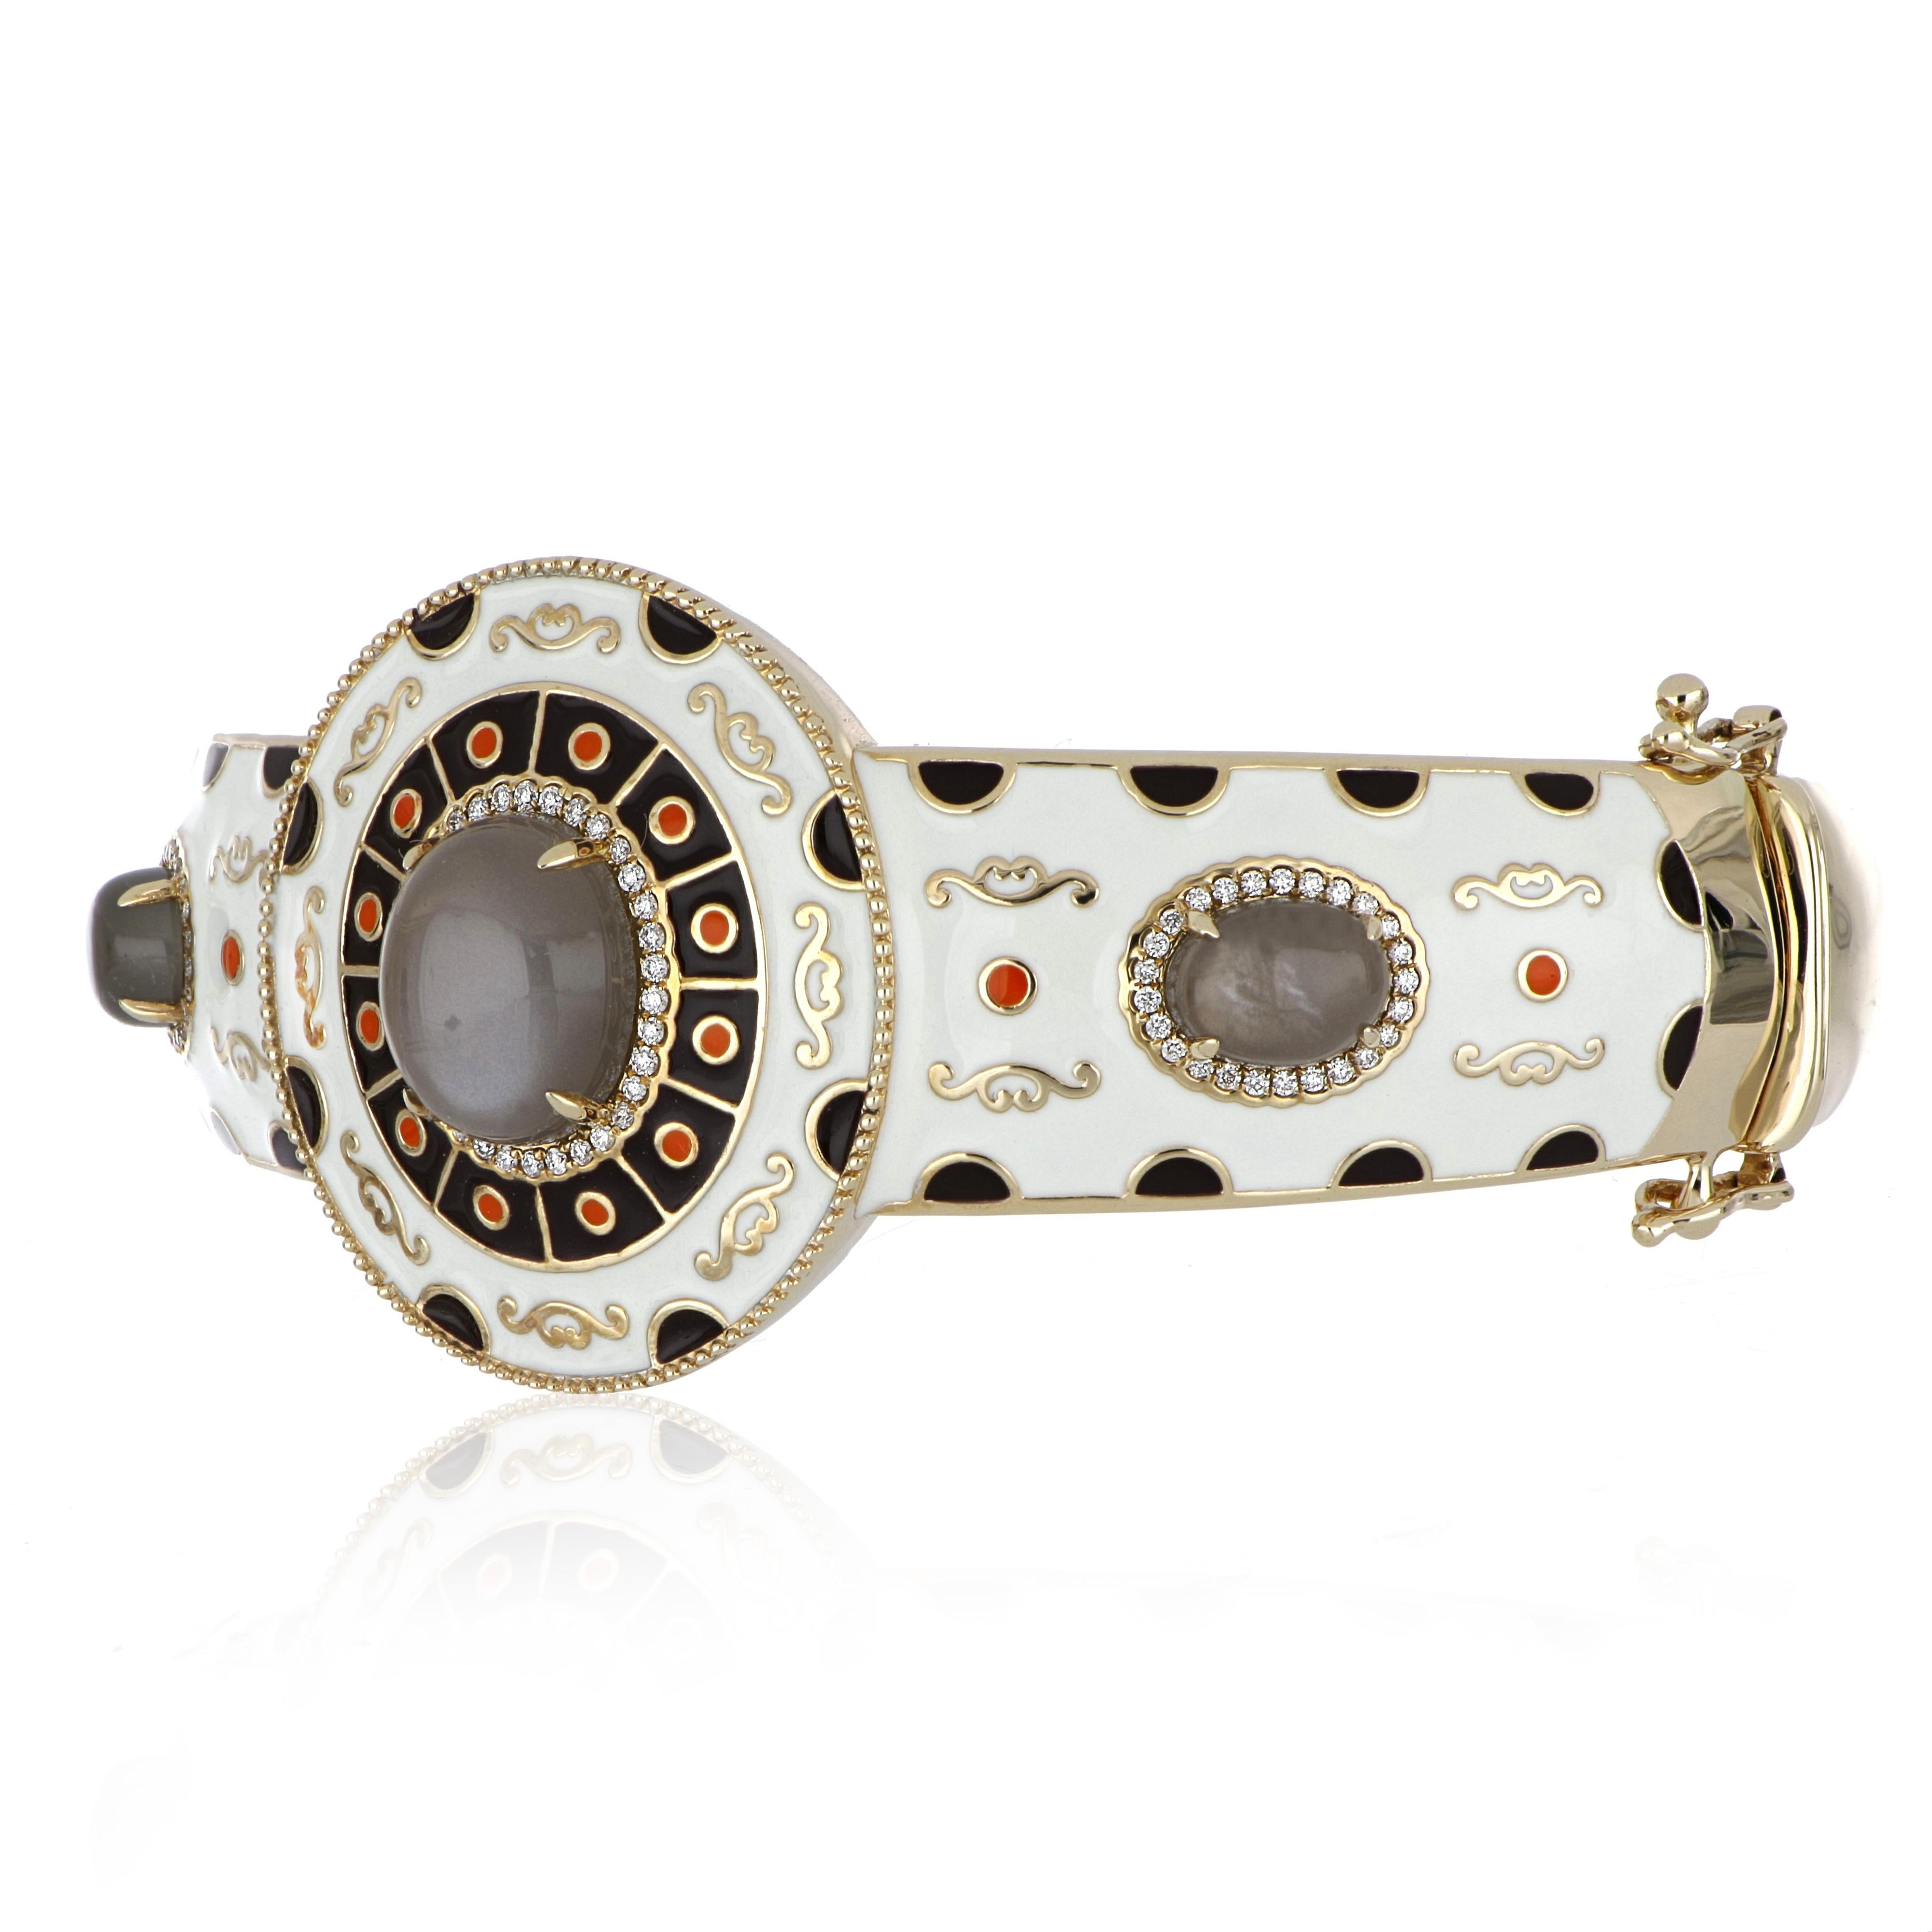 Elegant and exquisitely details Enamel Bangle in 14 KYG center set with 5.58 Cts. Cabochon Cut Grey Moonstone. Surrounded with Diamonds, weighing approx. 0.37 Cts. enhanced with detailed Multi Color Enamel and 3.12 Cts (Total) Grey Moonstone on